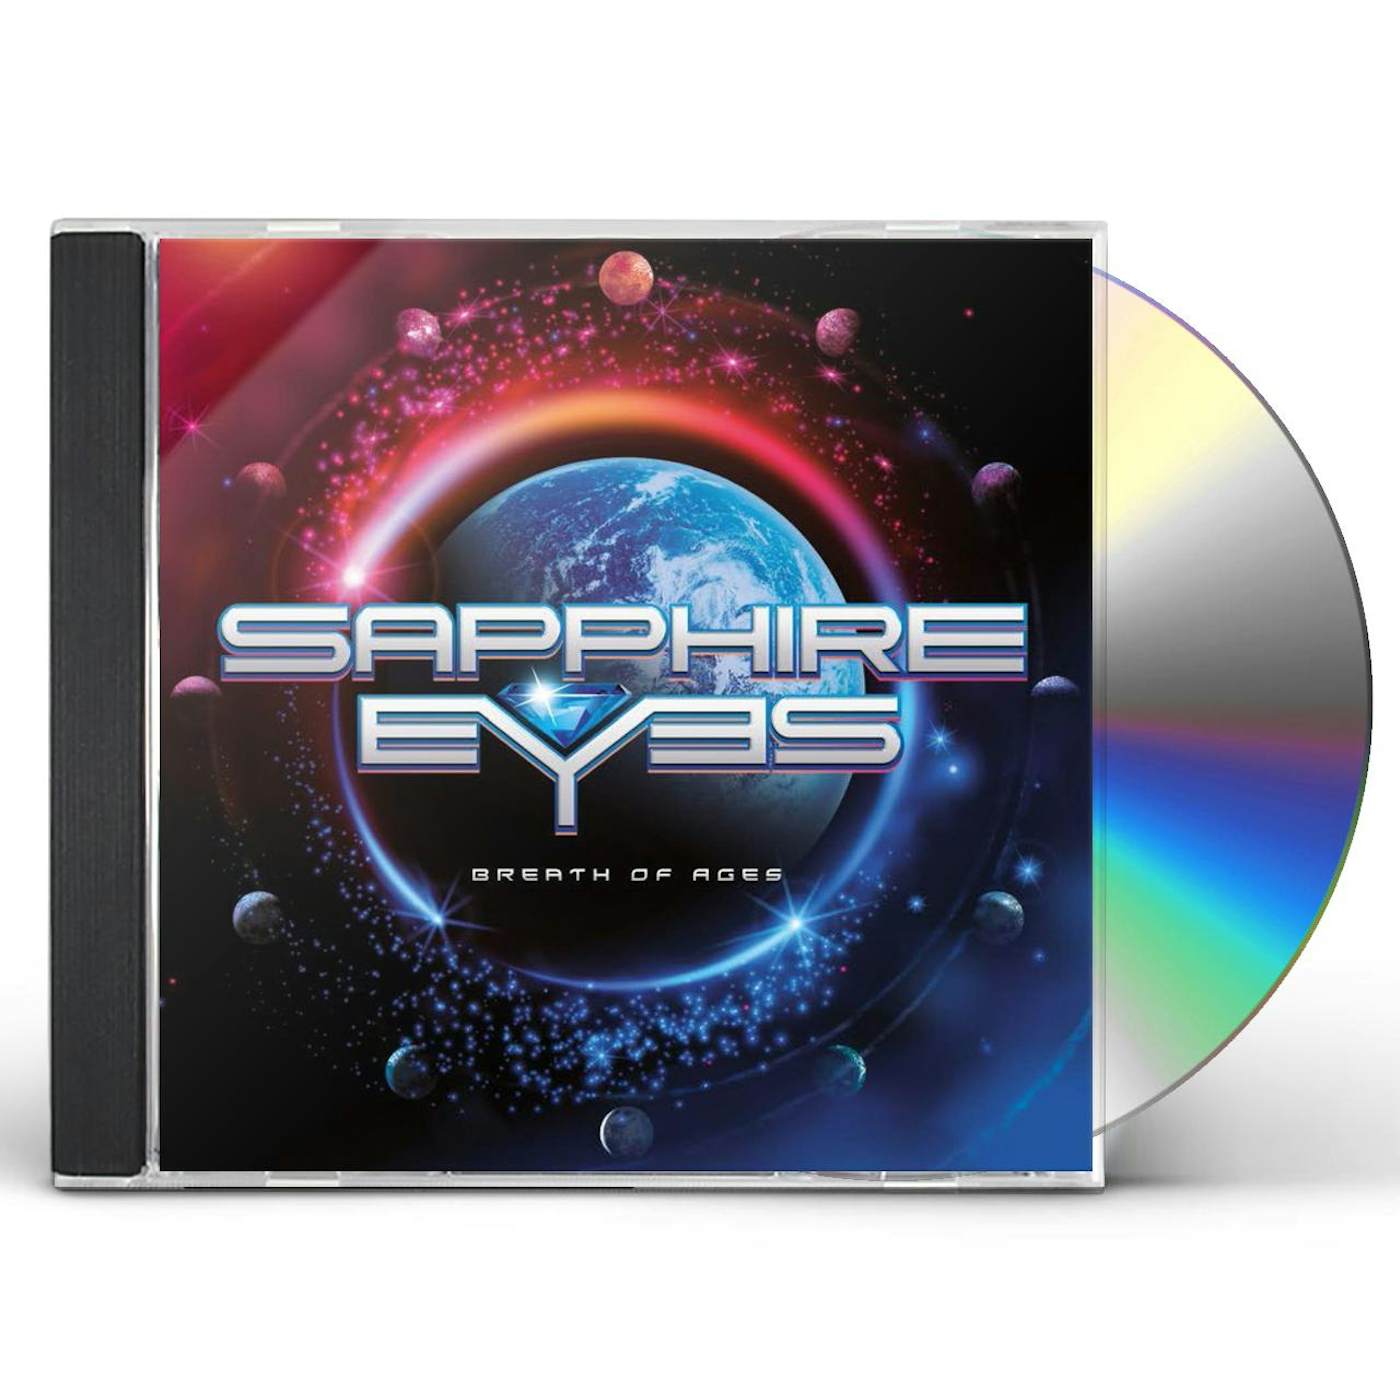 Sapphire Eyes BREATH OF AGES CD